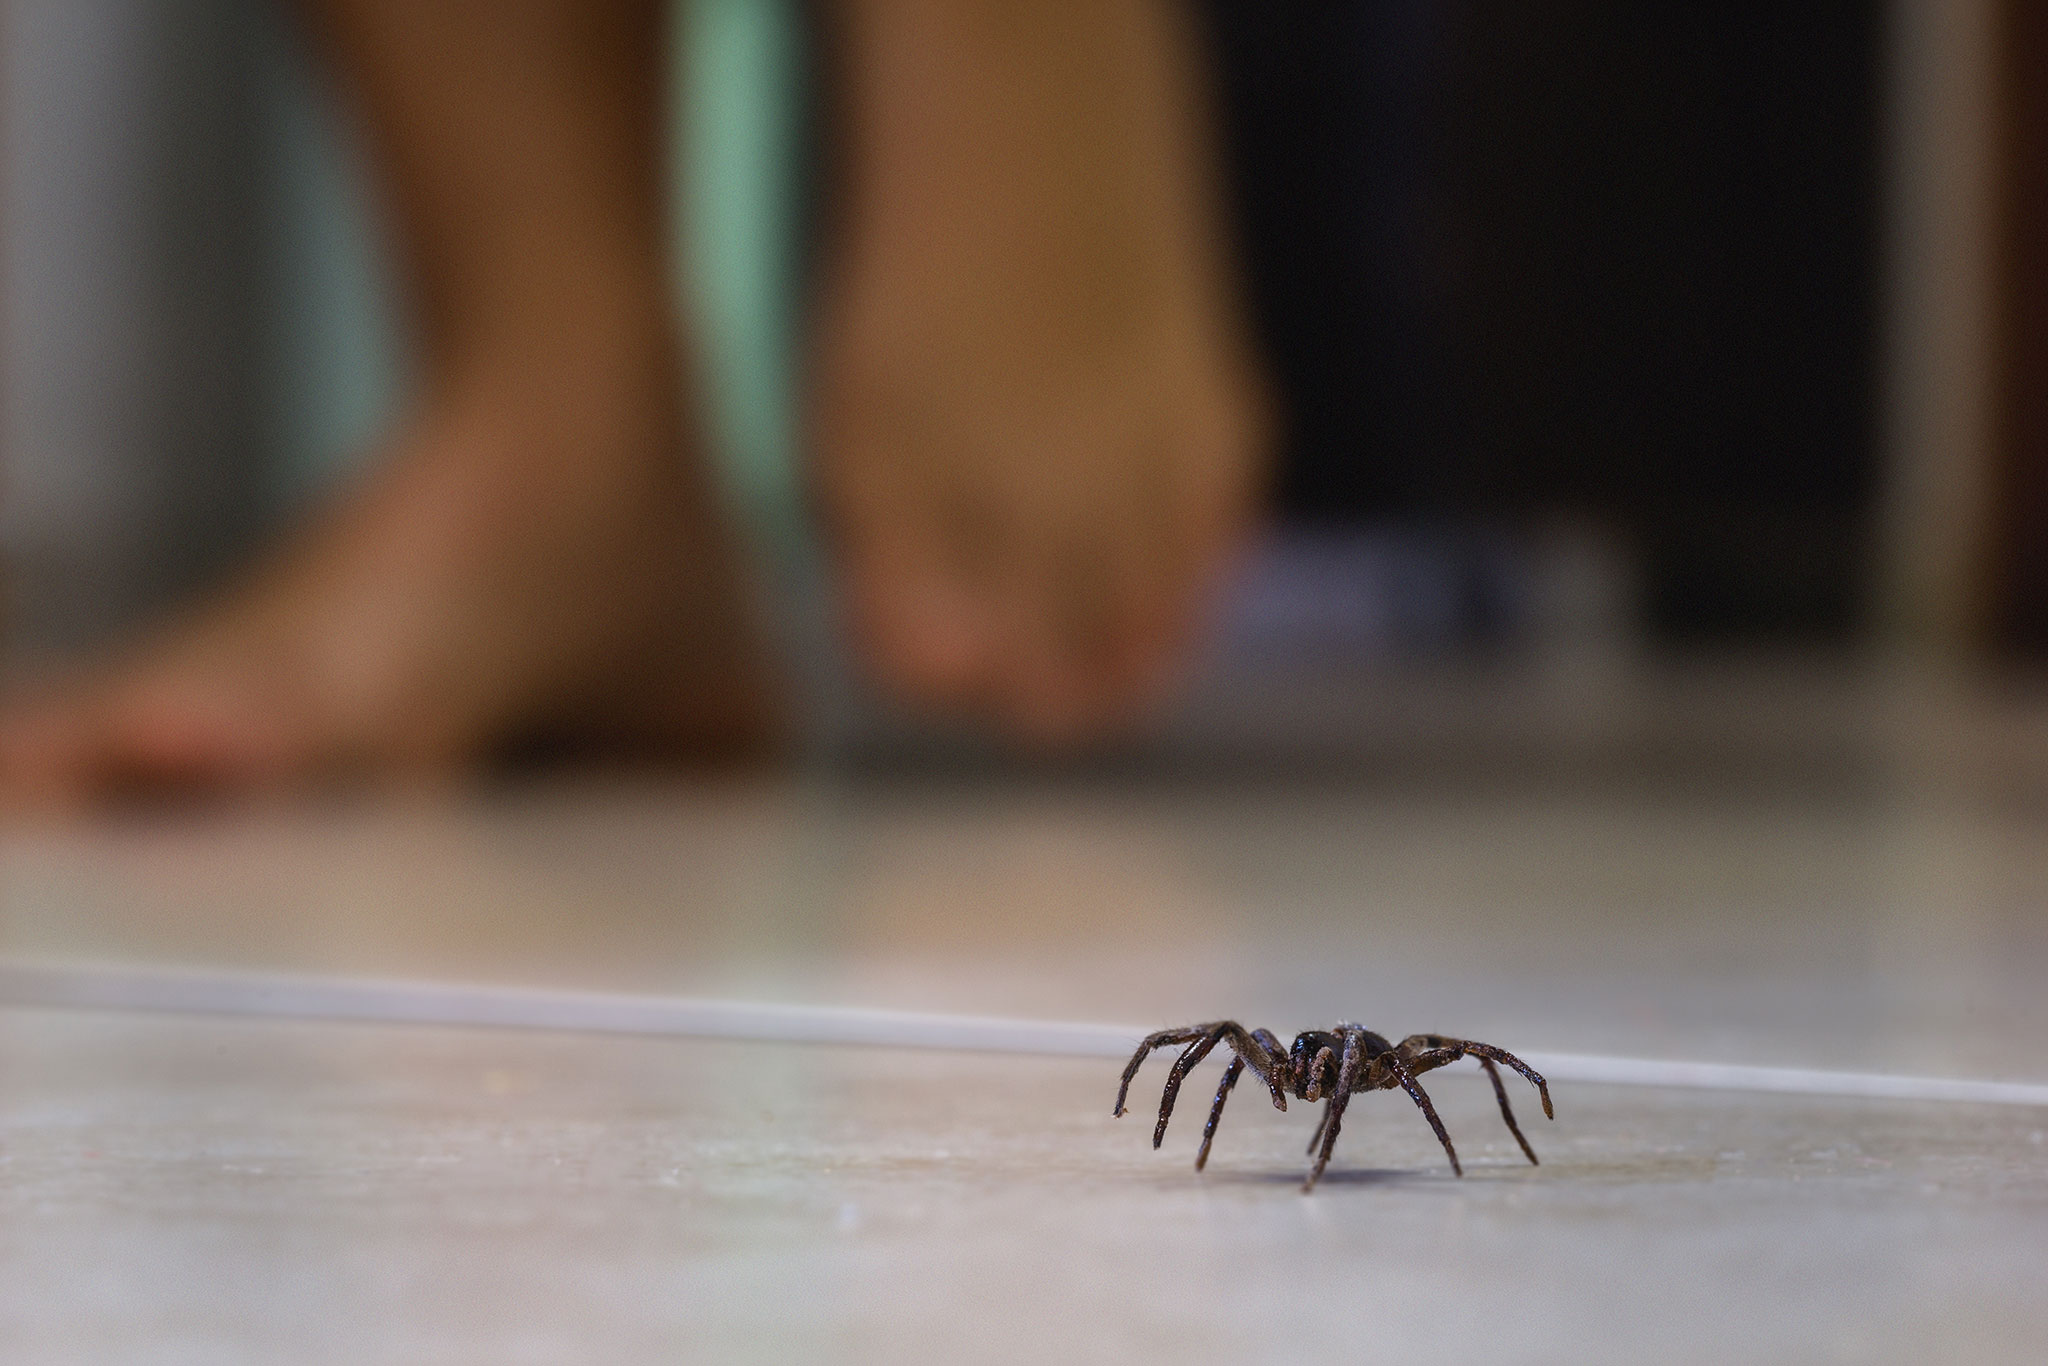 A close up of a spider scurrying across a concrete floor with someone walking in the background.